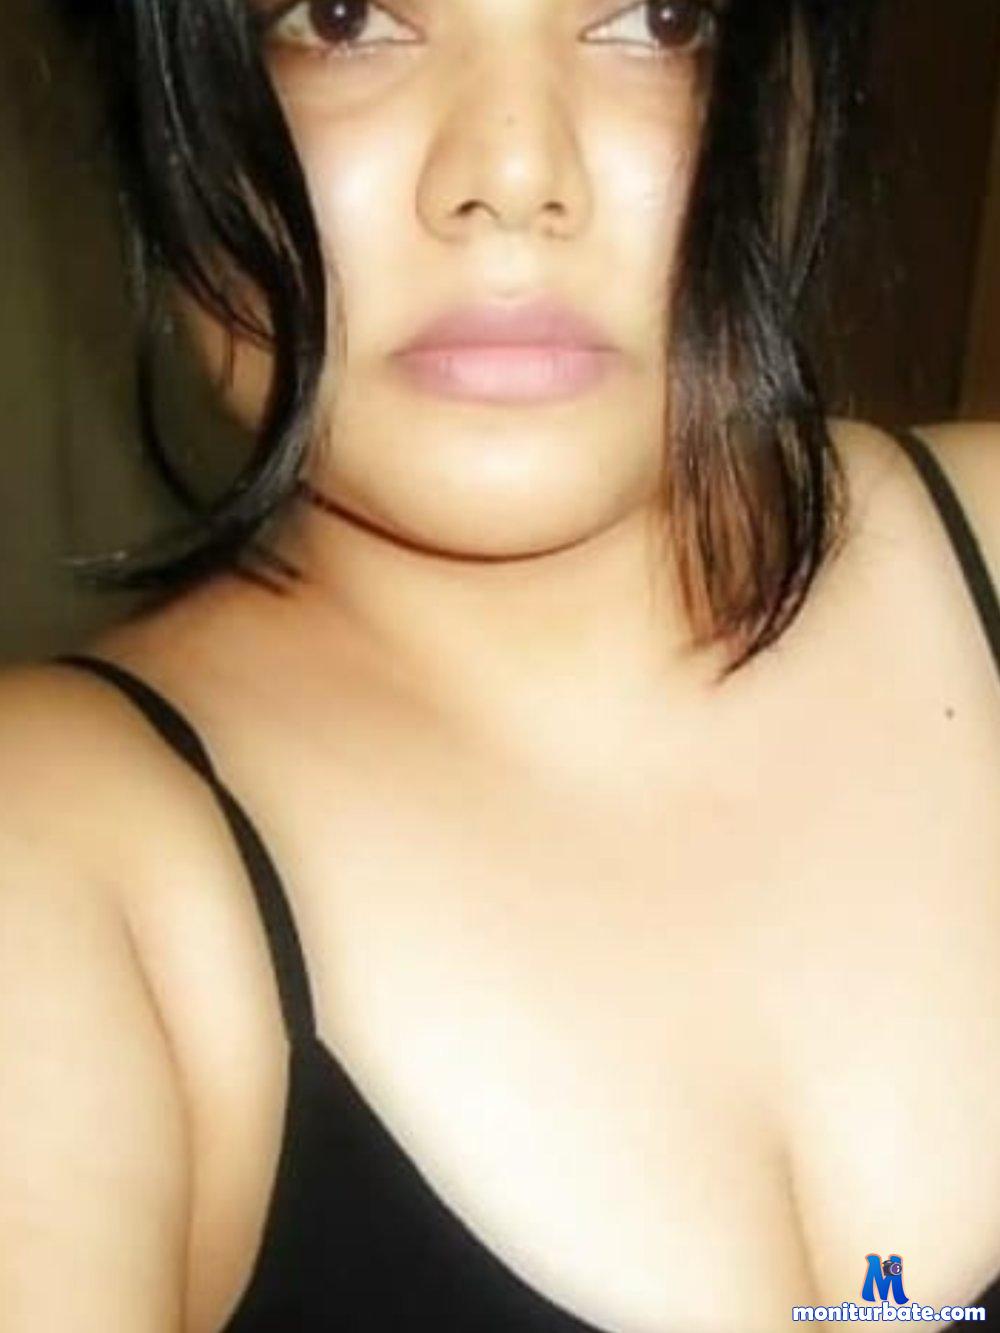 Sakshi_Sehgal12 Stripchat performer girls do Fingering specifics Big Ass specifics Big Tits mobile age Teen do Talk do Anal do Blowjob do Doggy Style hair Color Black body Type Medium subculture Romantic small Audience ethnicity Indian auto Tag New private Price Eight auto Tag Spy auto Tag P2 P do Facial